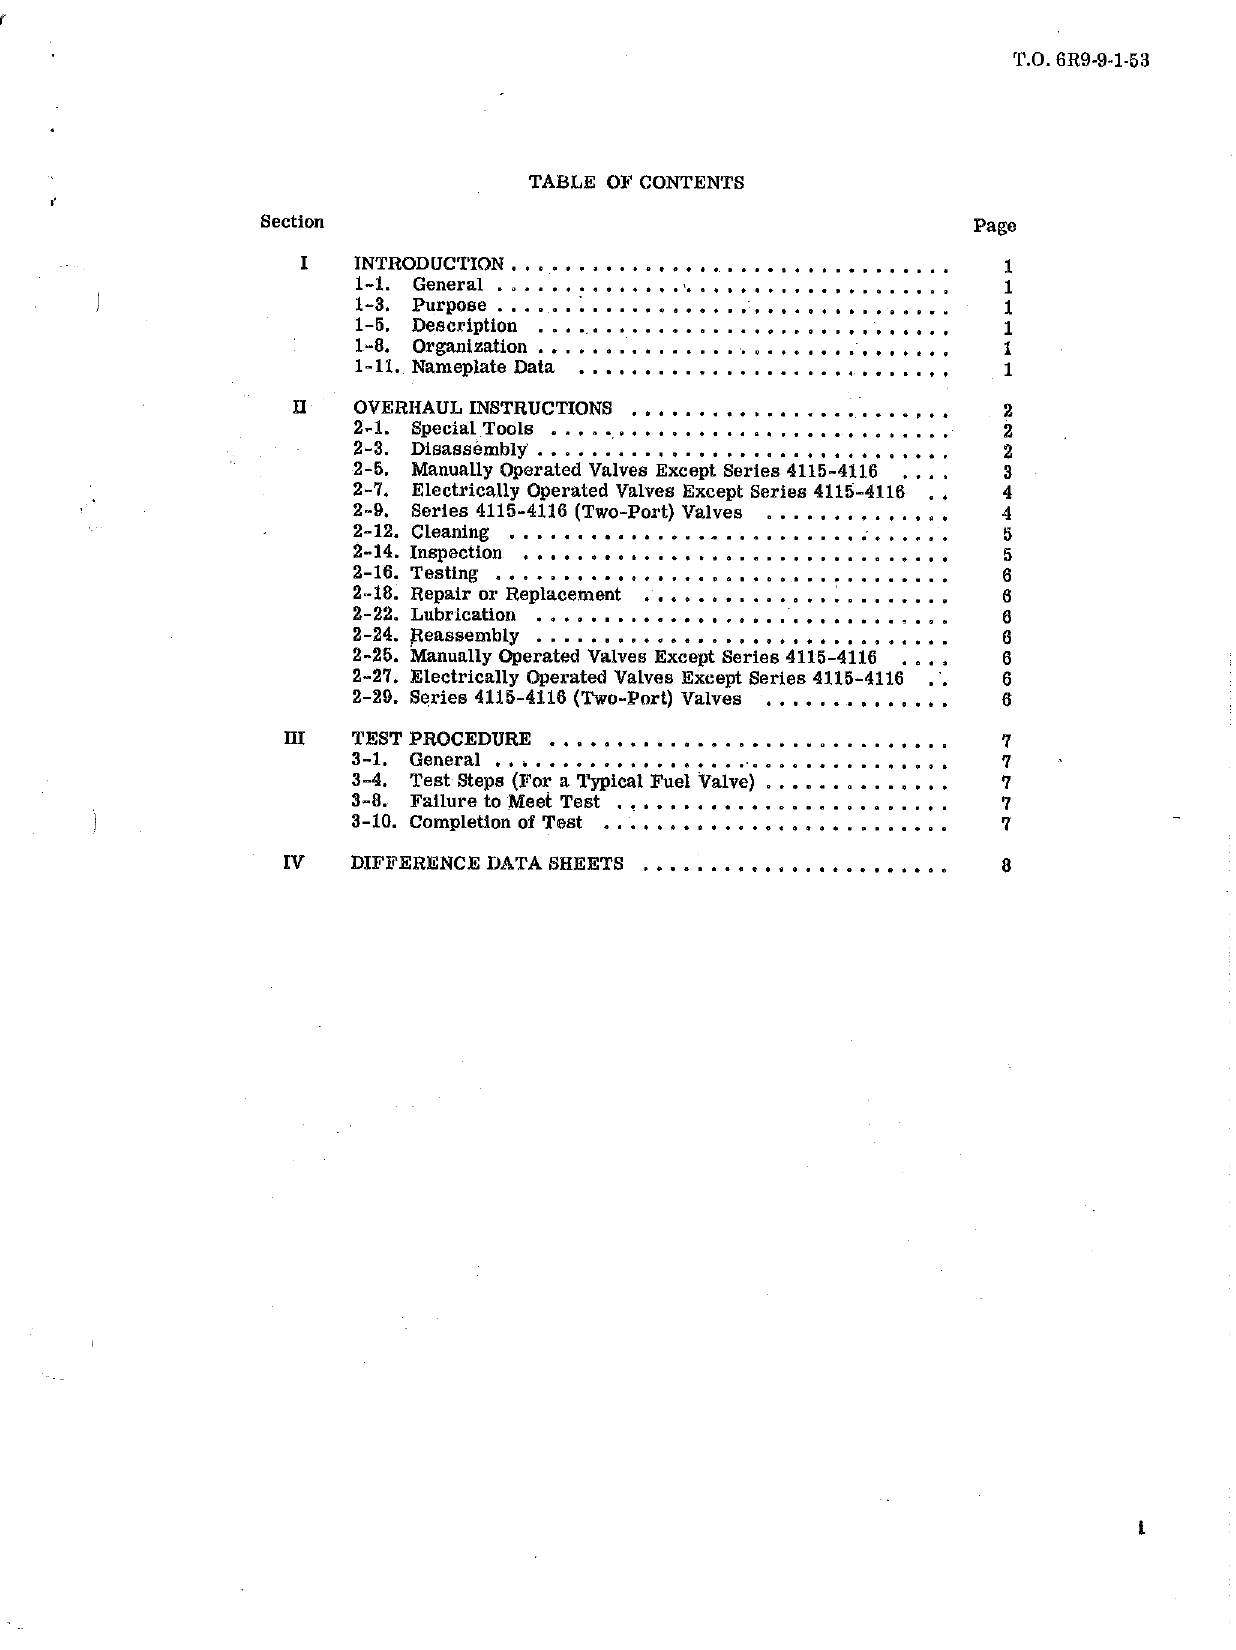 Sample page 3 from AirCorps Library document: Technical Manual for Selector Valves